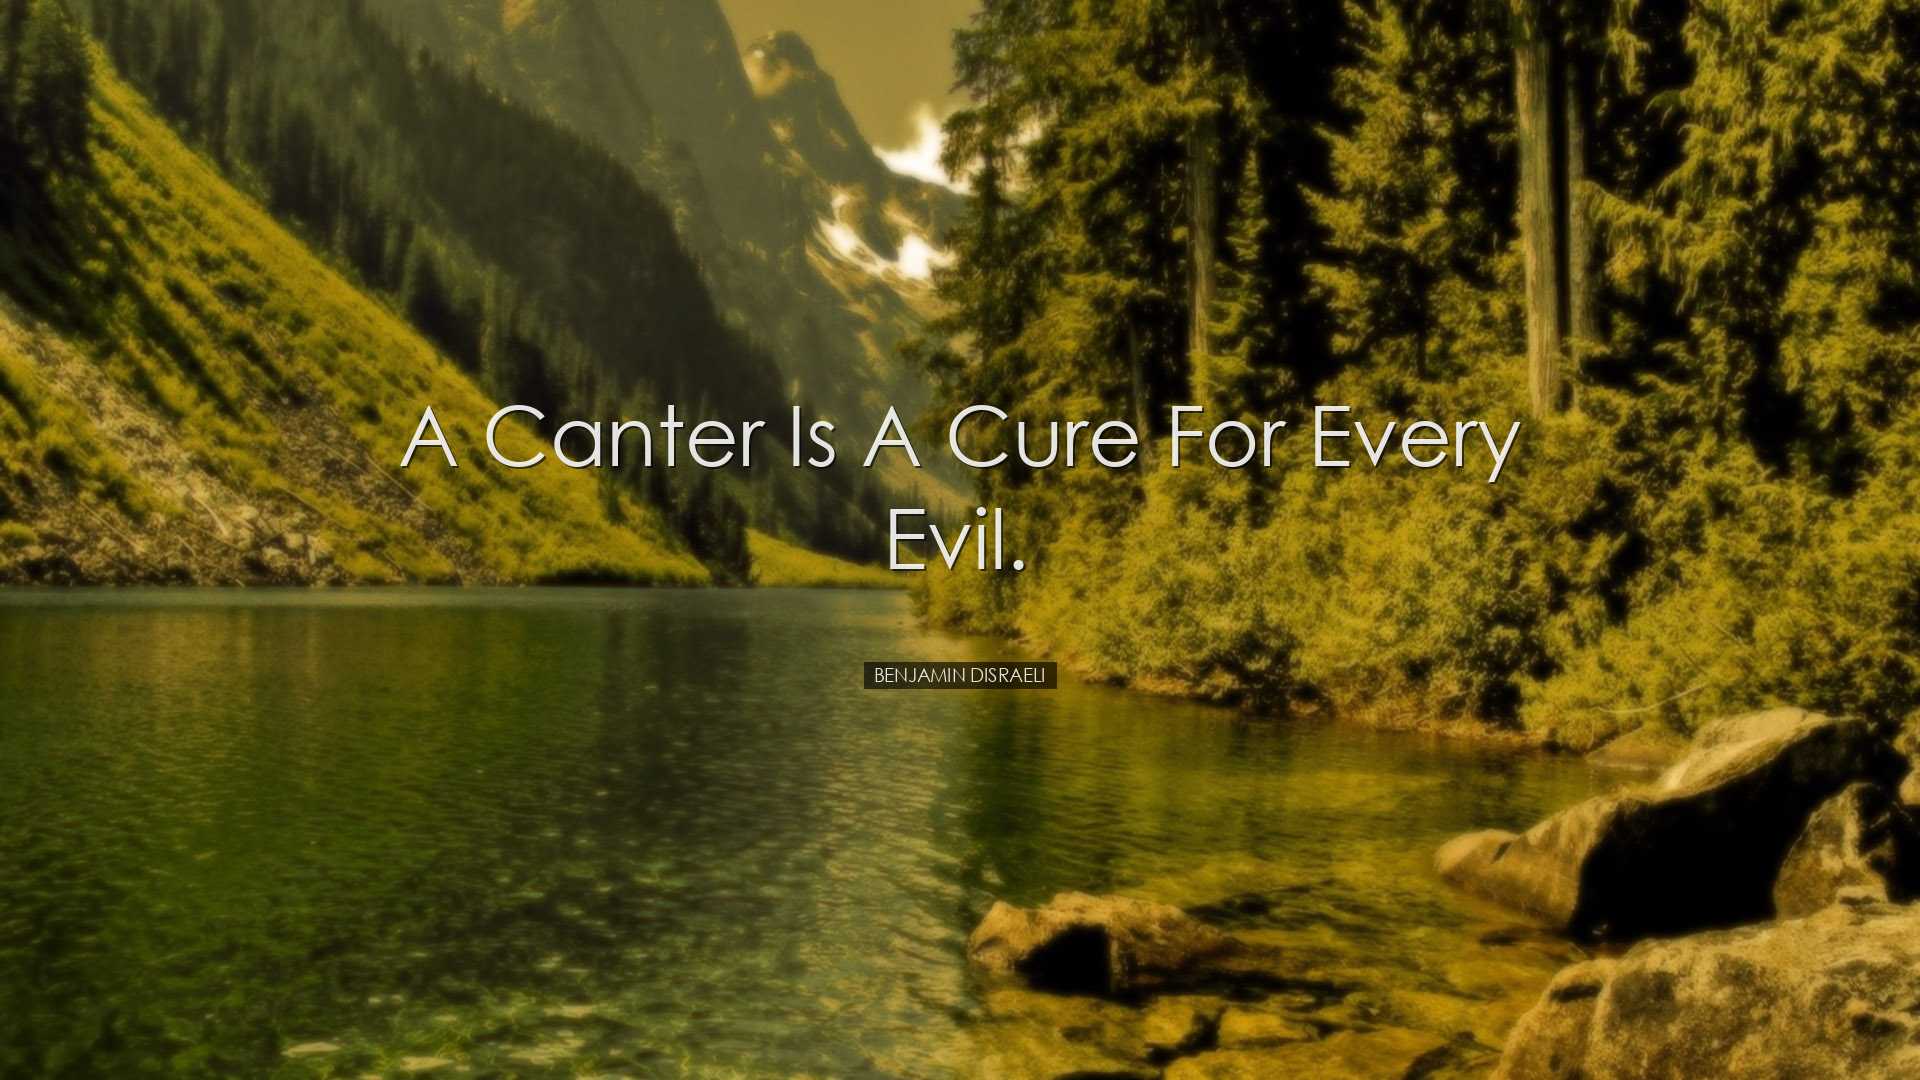 A canter is a cure for every evil. - Benjamin Disraeli